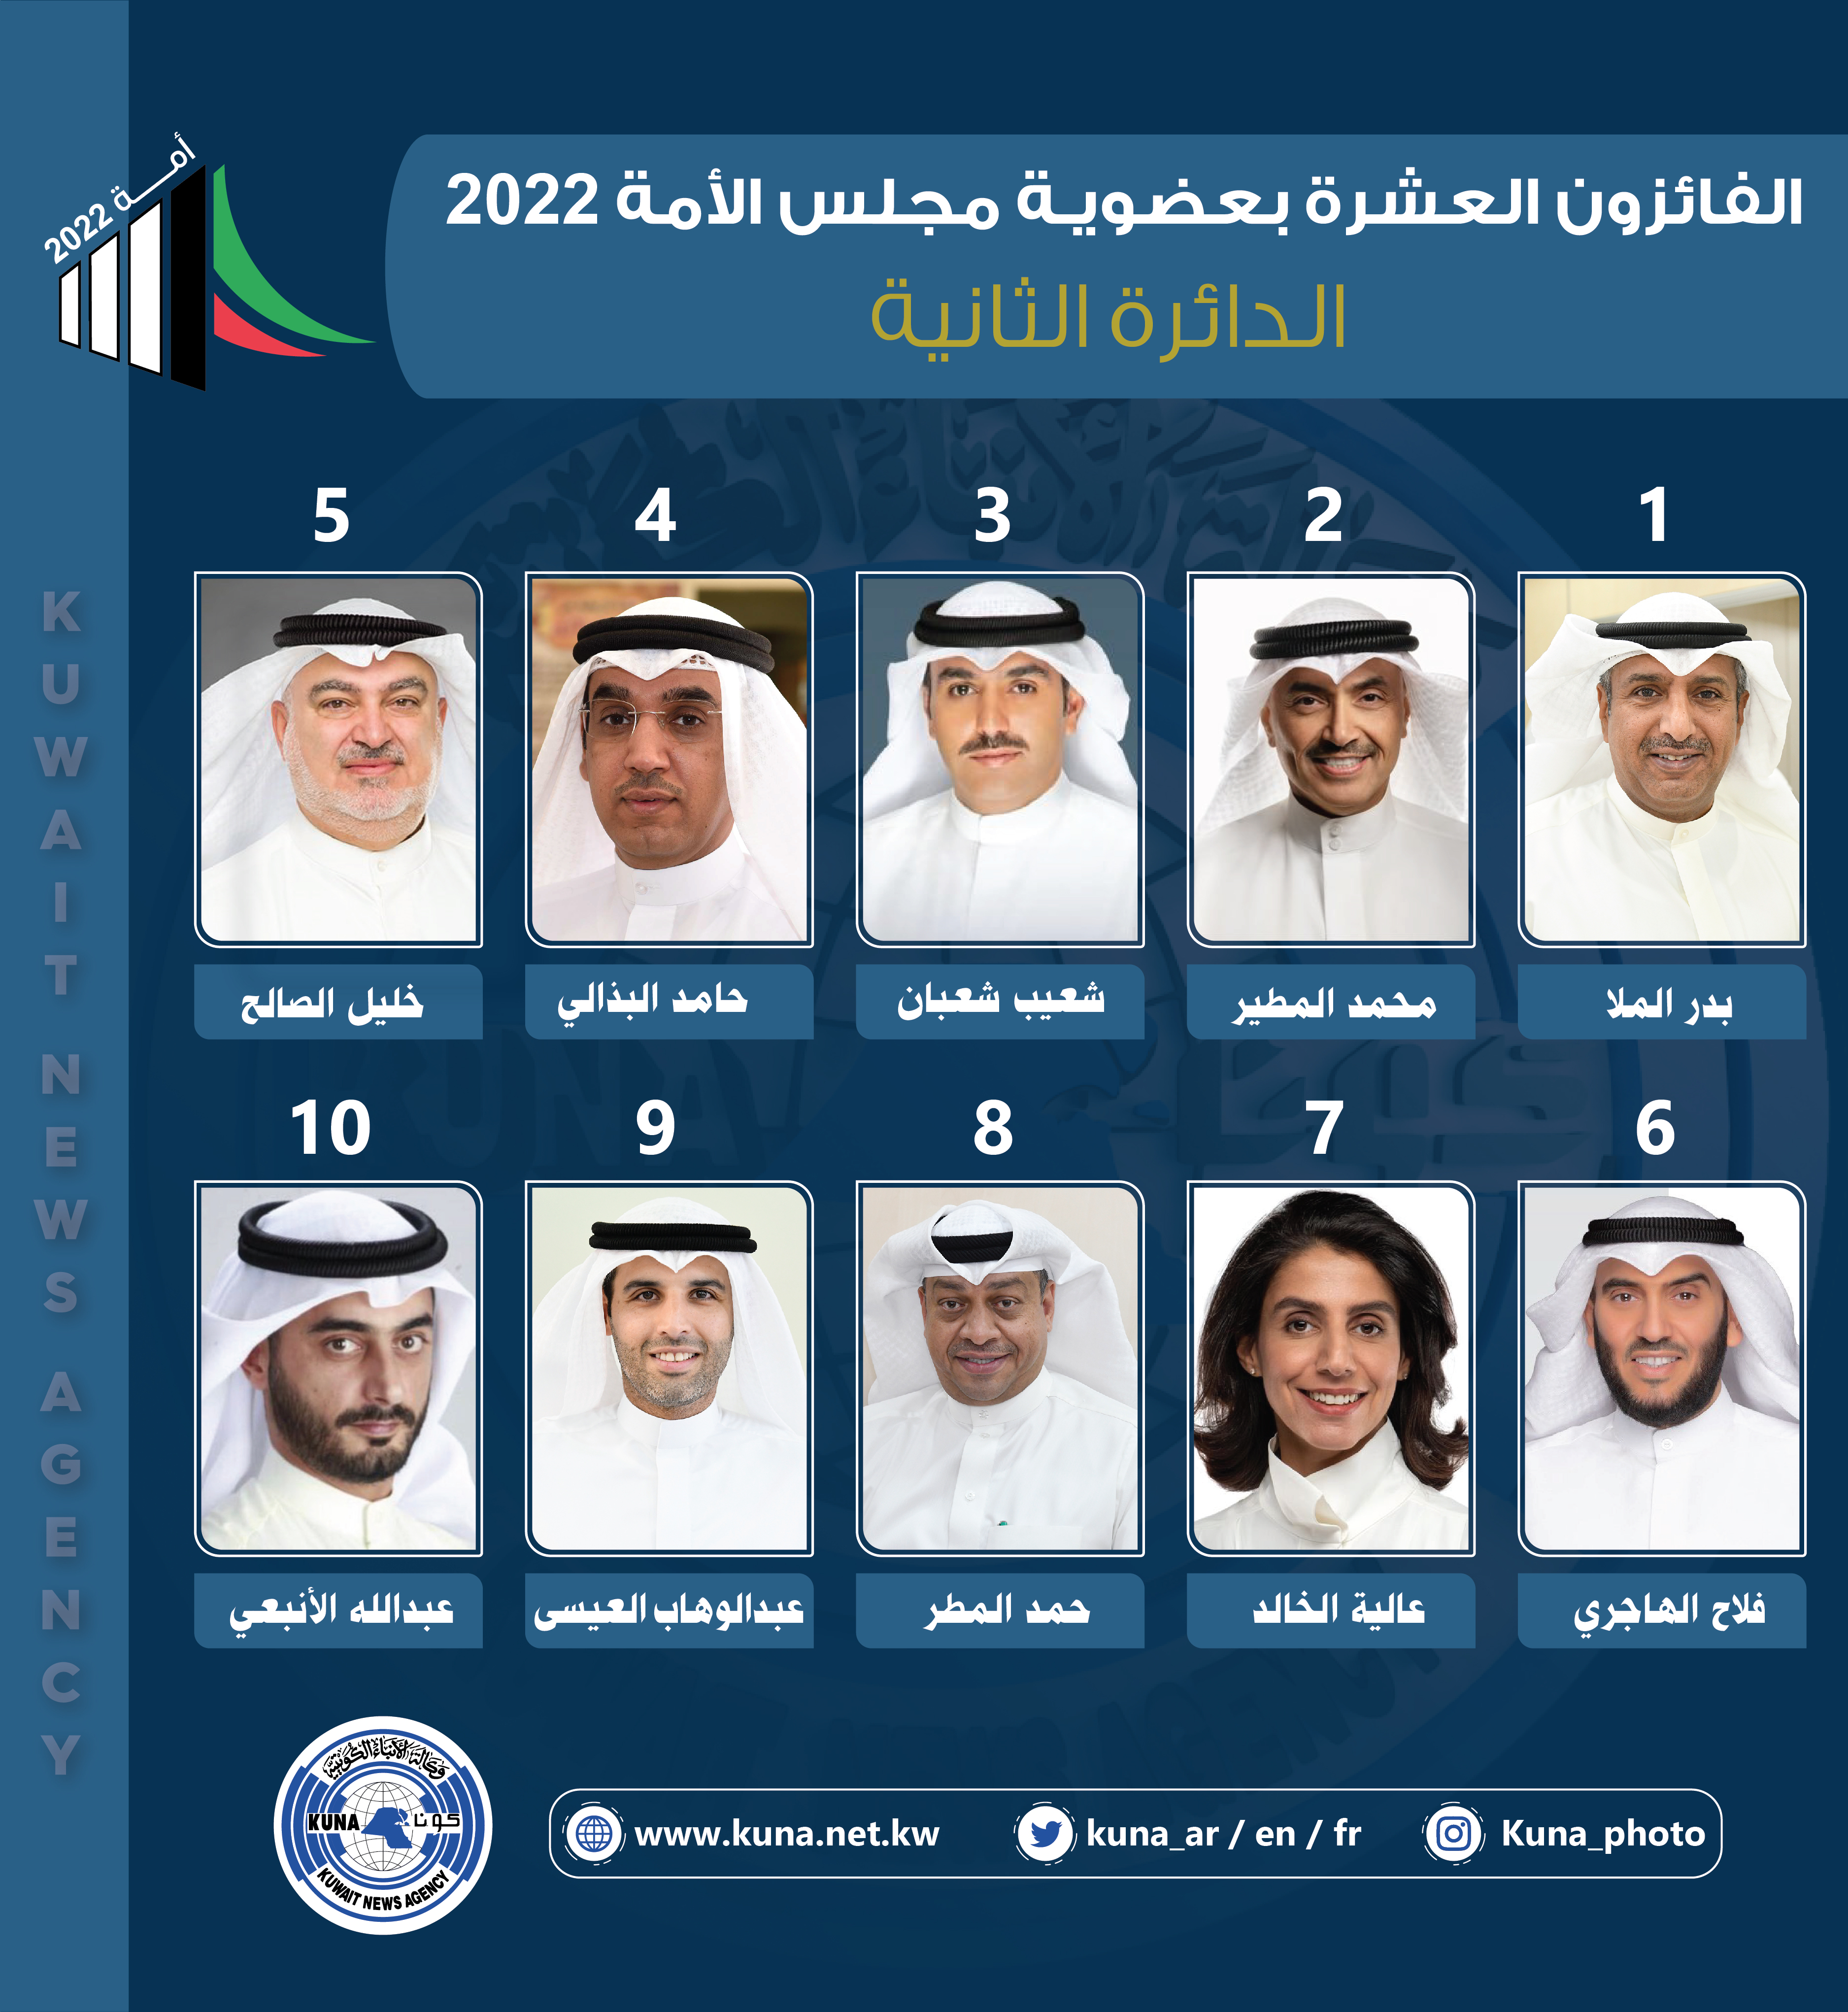 Winners of the National Assembly elections '22 in the 2nd constituency